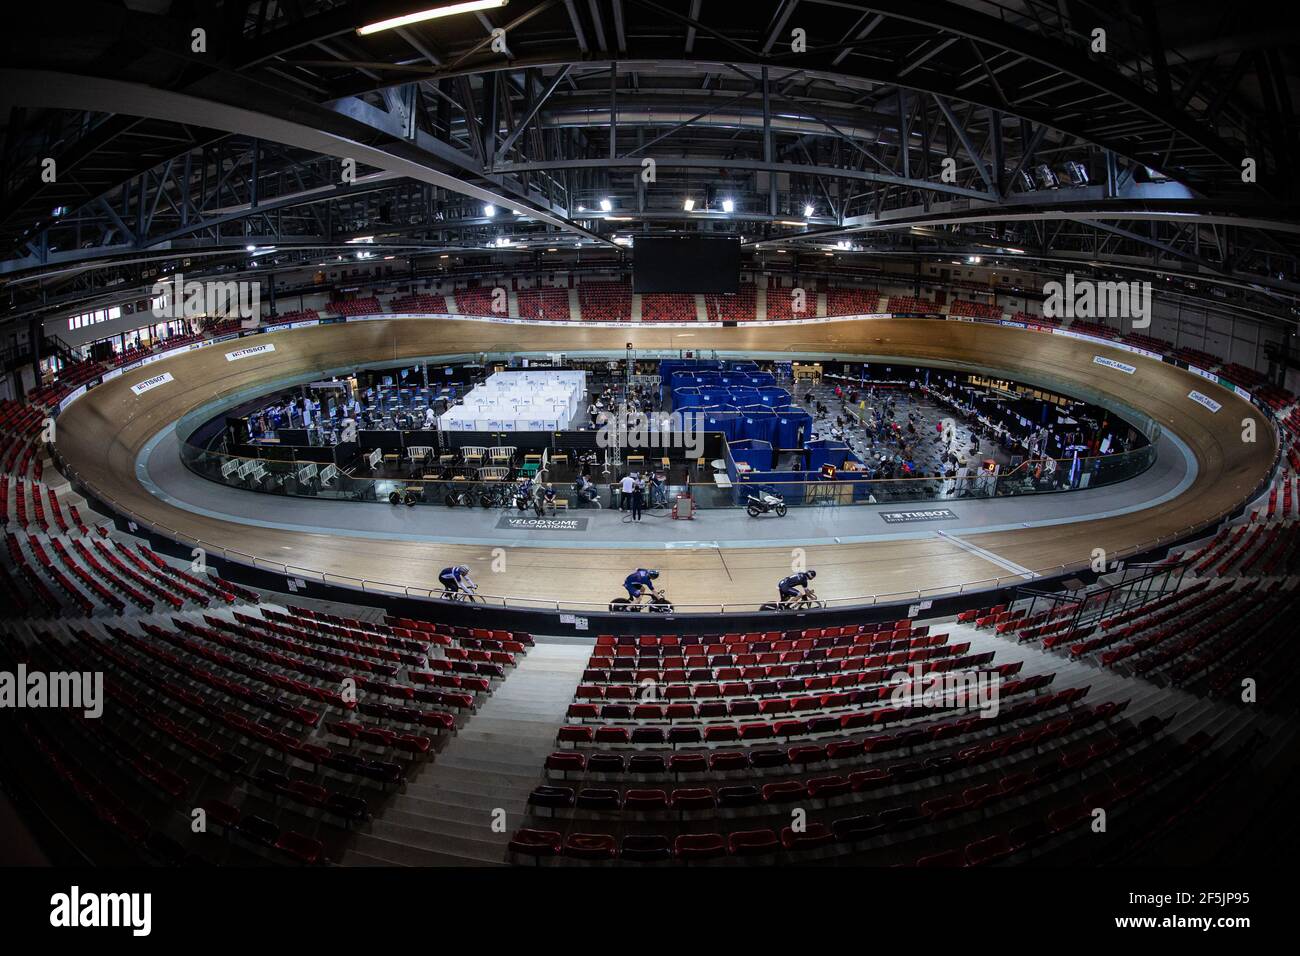 Paris, Paris in France. 26th Mar, 2021. France's national cycling team train as people wait to receive COVID-19 vaccine at the national velodrome used as a COVID-19 vaccination centre in Saint-Quentin-en-Yvelines, southwest of Paris in France, on March 26, 2021. As of Friday, 7,519,740 people in France -- or 14.3 percent of the adult population -- had received at least one COVID-19 vaccine dose, and 2,653,261 people -- 5.1 percent of the adult population -- both doses, the Health Ministry said. Credit: Aurelien Morissard/Xinhua/Alamy Live News Stock Photo